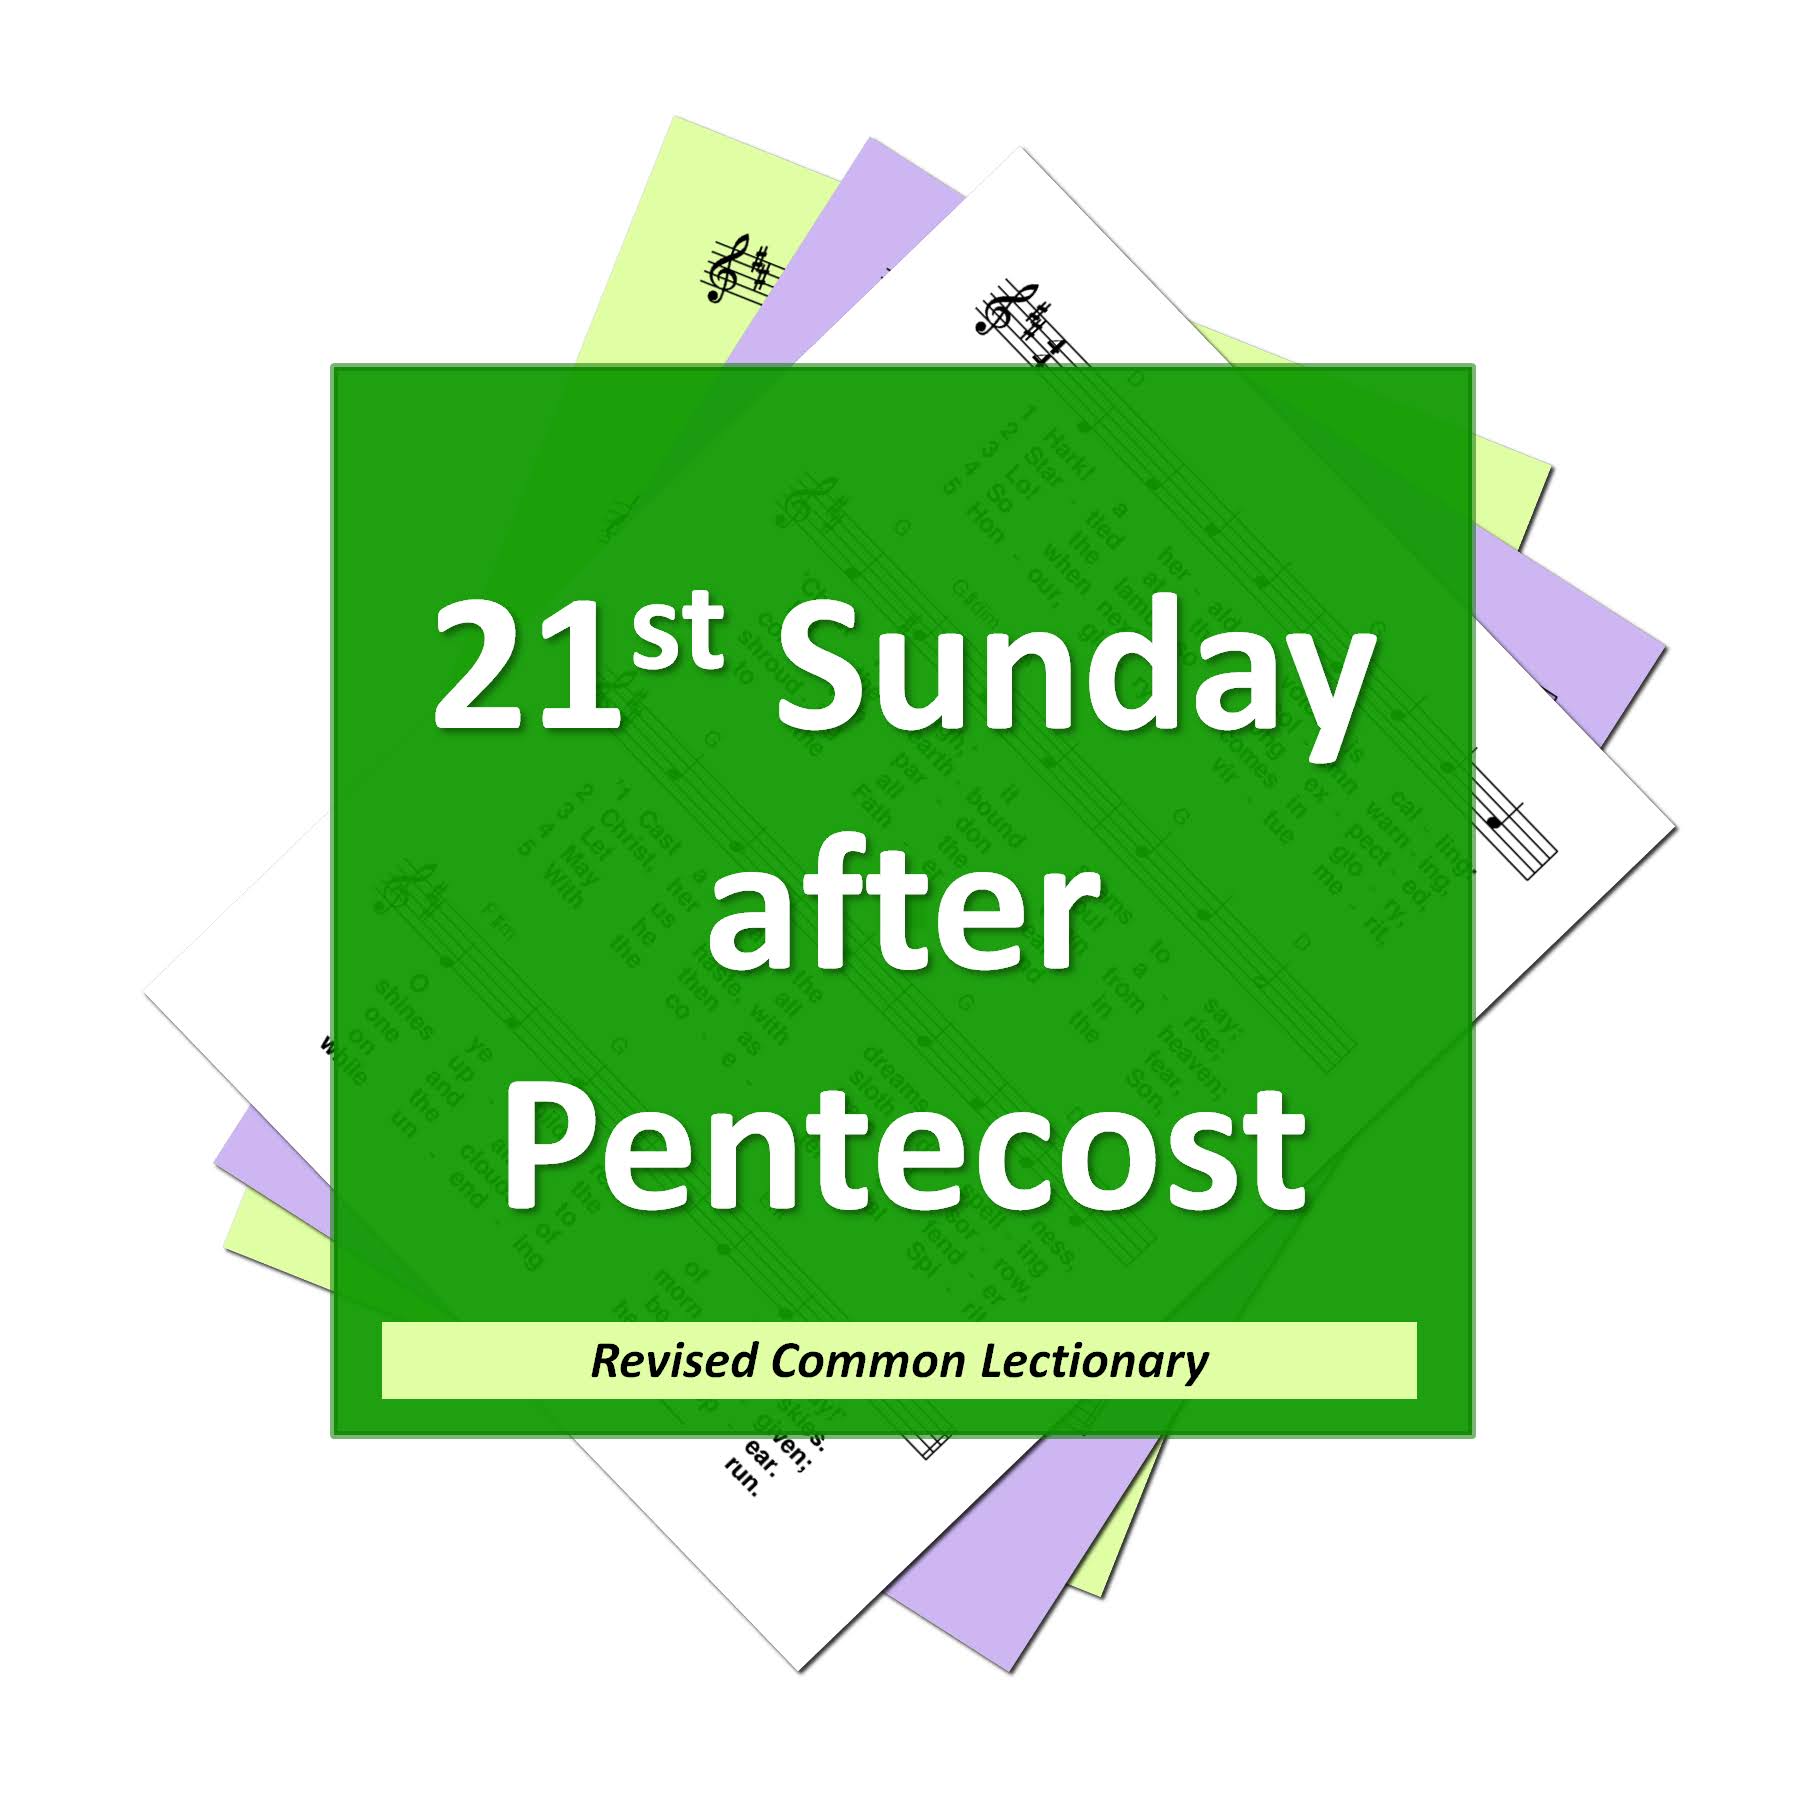 Hymns for the 21st Sunday after Pentecost Proper 26